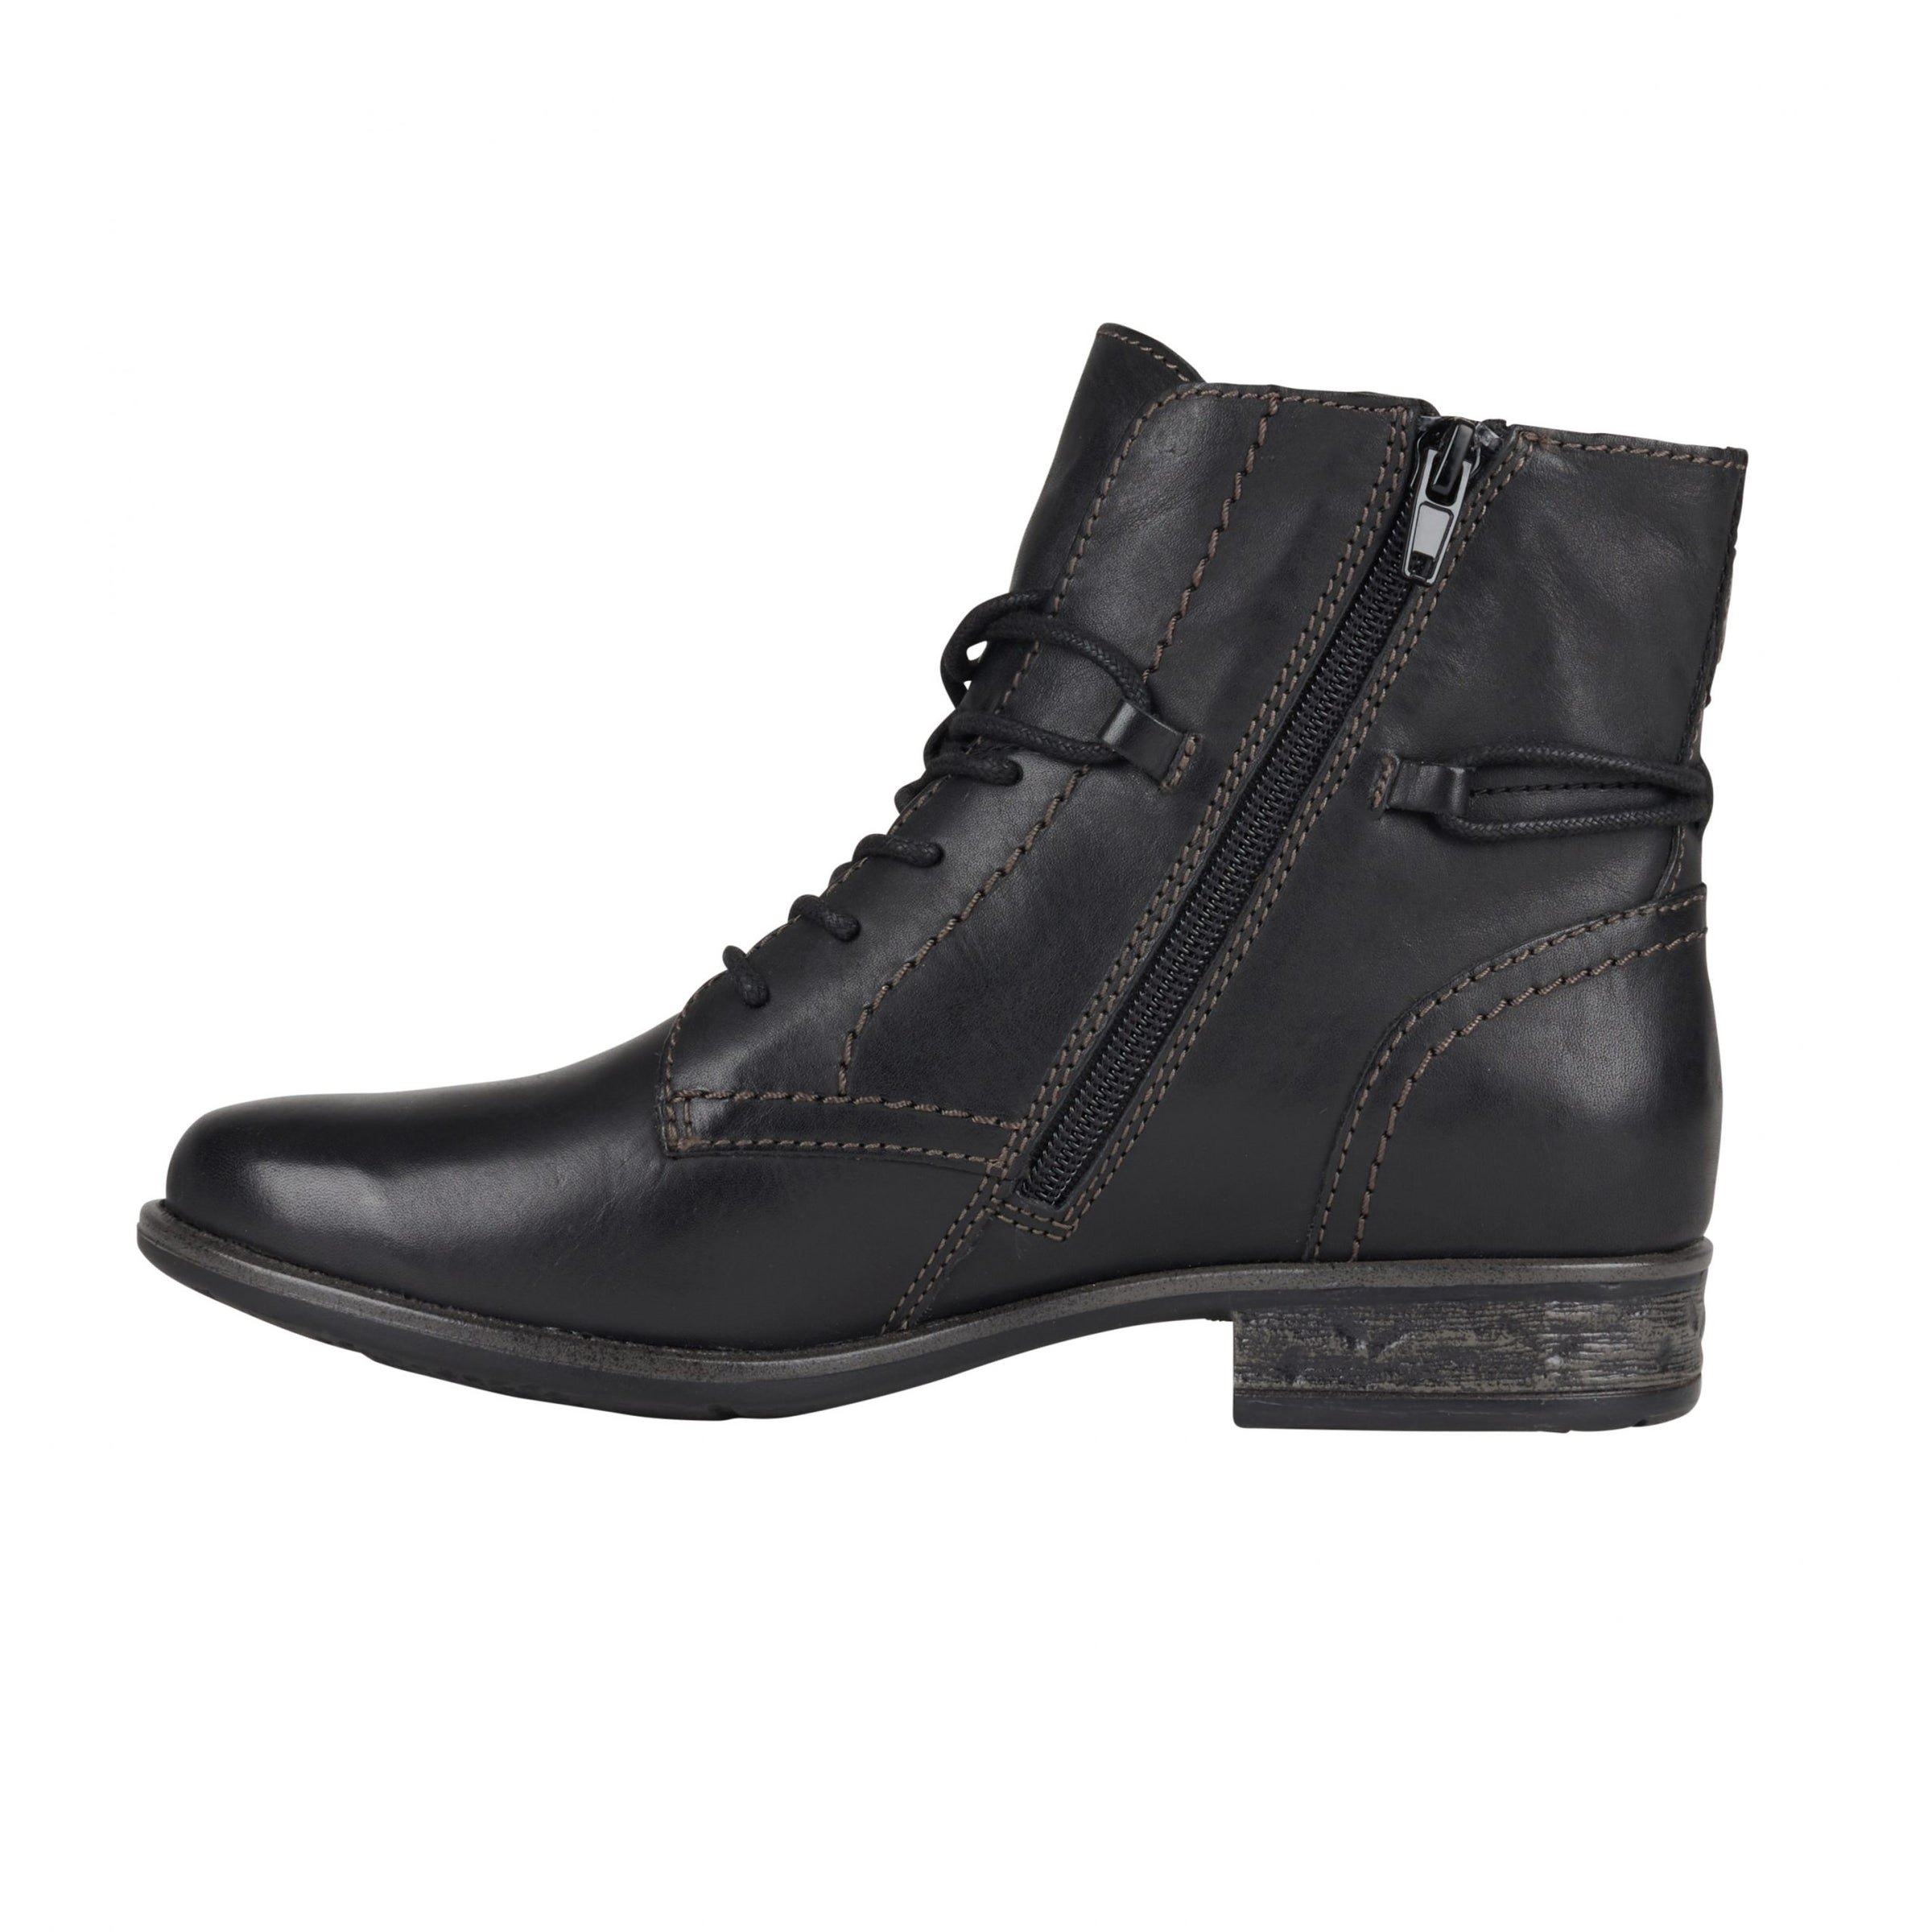 Adara Black Leather Ankle Boots | Planet Shoes